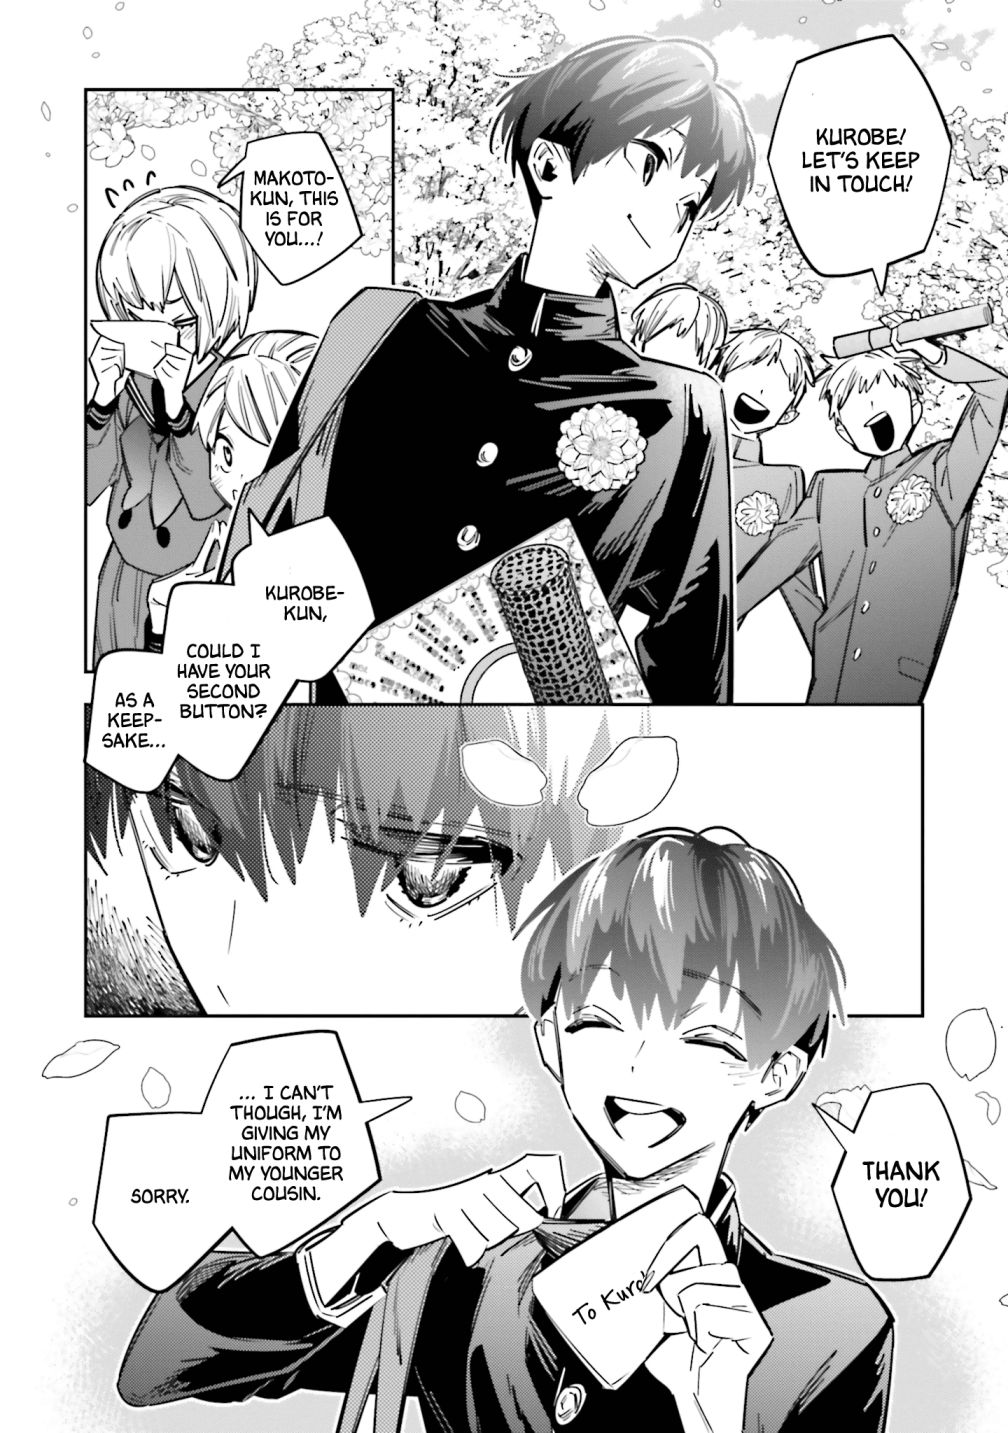 I Reincarnated As The Little Sister Of A Death Game Manga’S Murd3R Mastermind And Failed - chapter 6 - #4